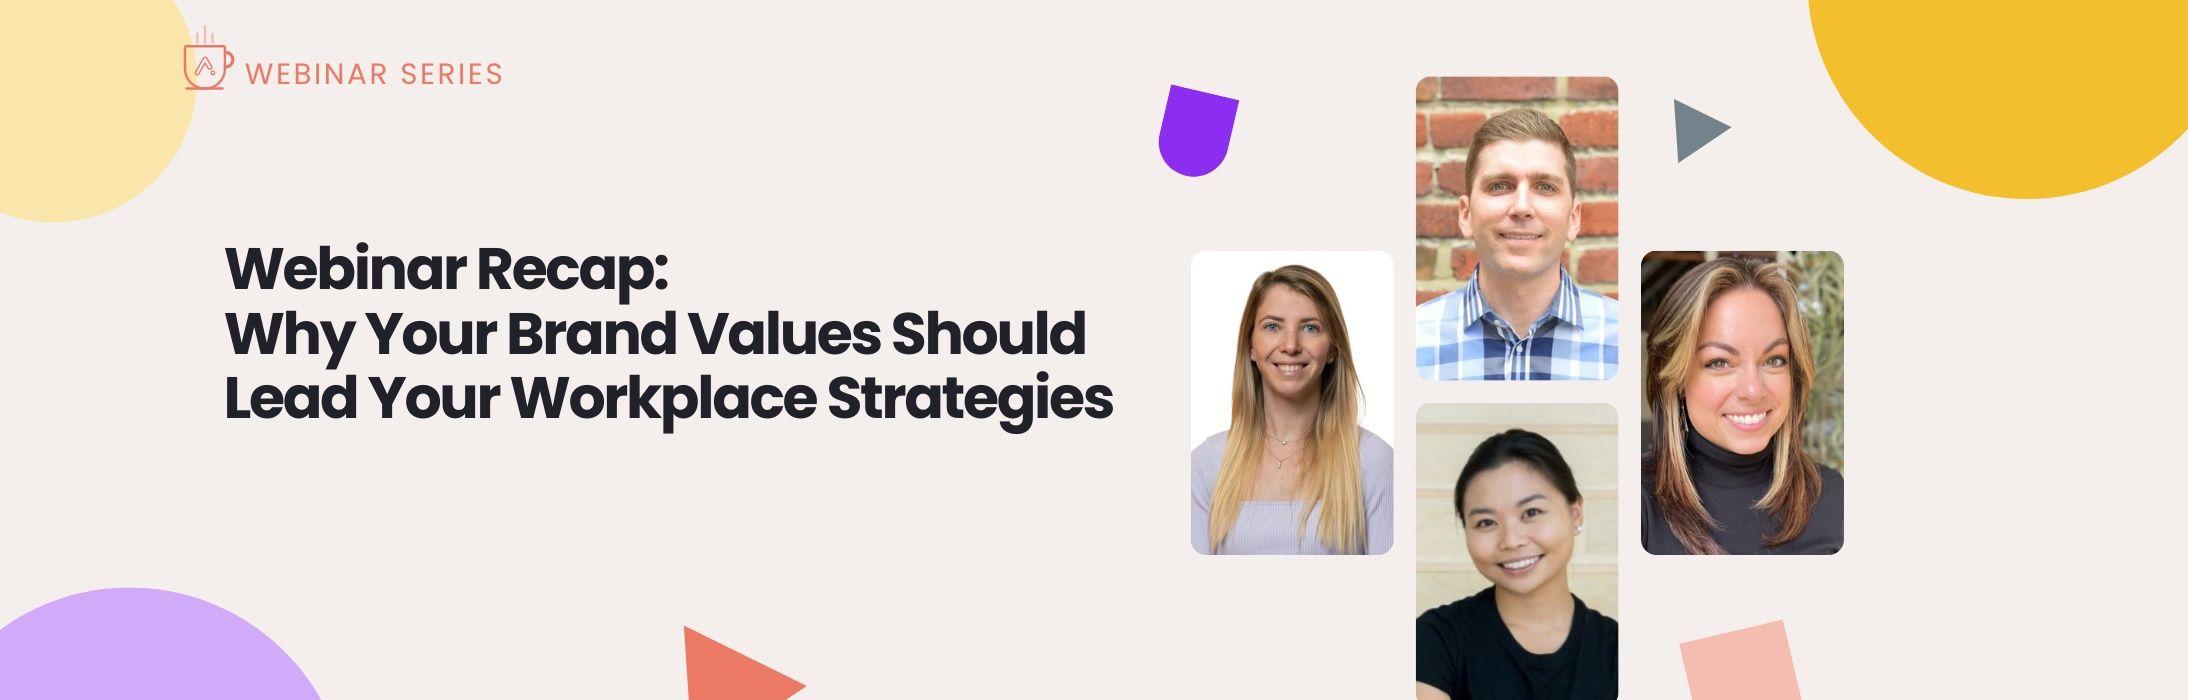 Webinar Recap: Why Your Brand Values Should Lead Your Workplace Strategies